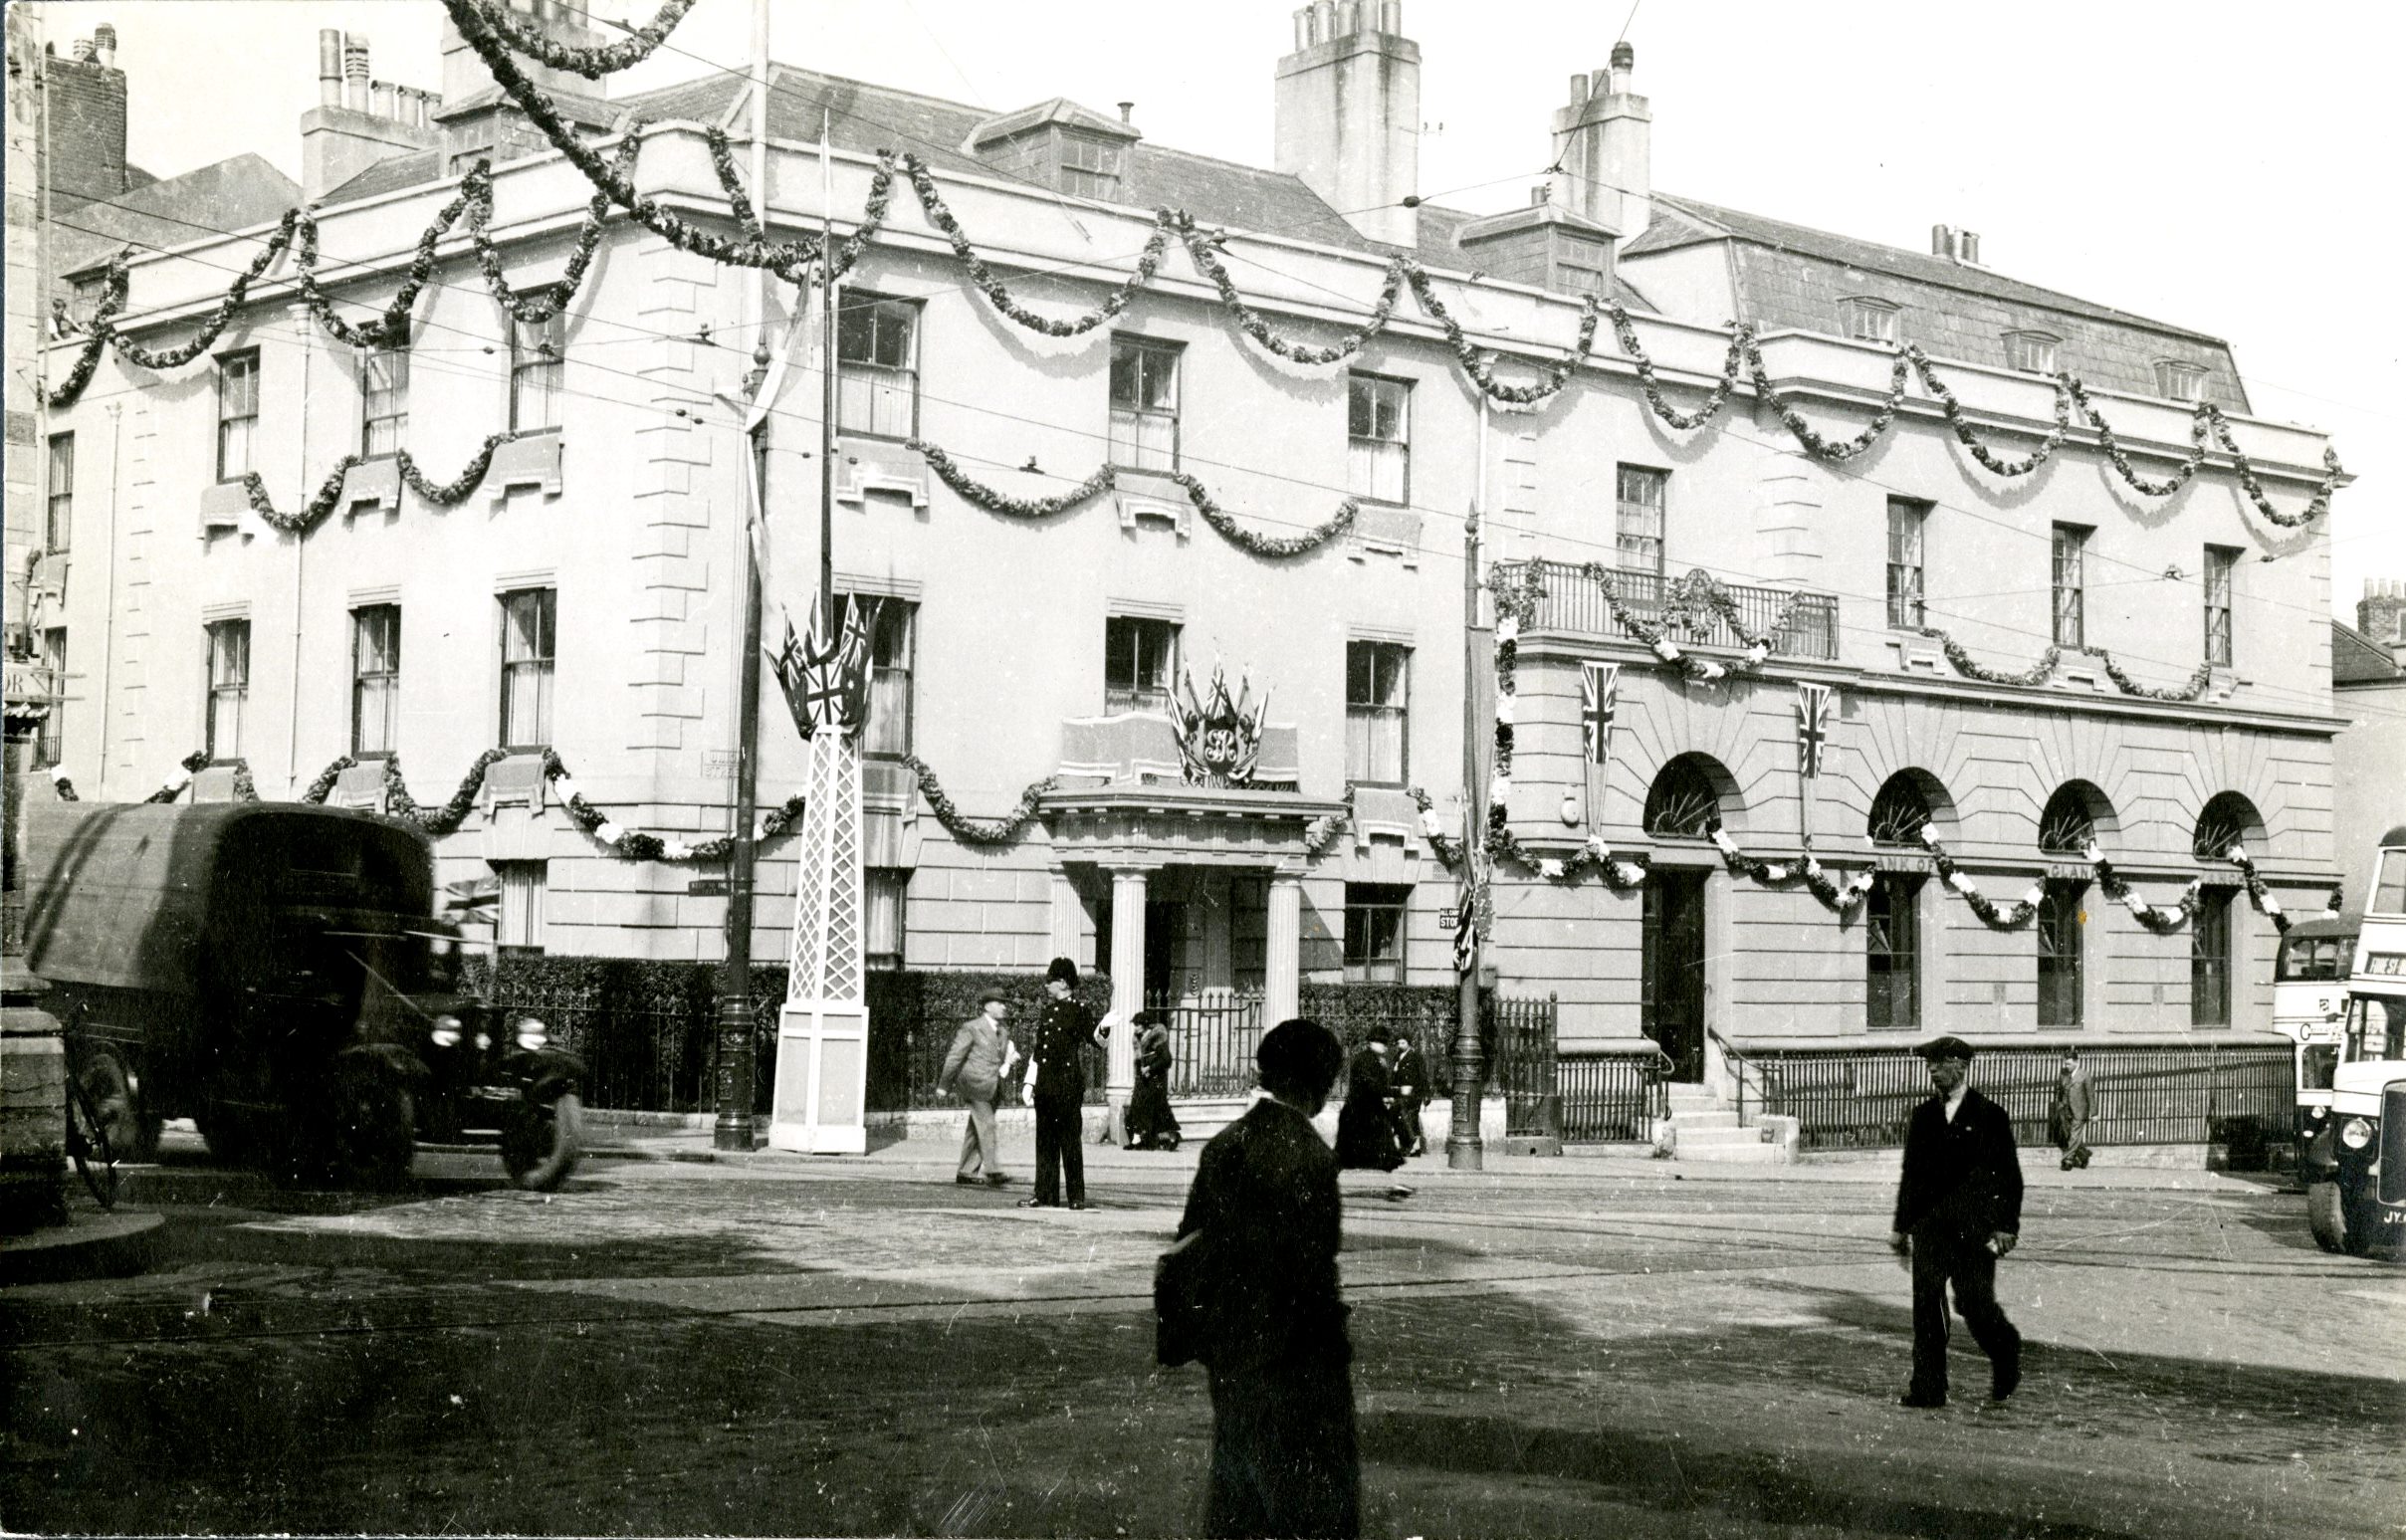 Street view of the Bank of England building in Plymouth